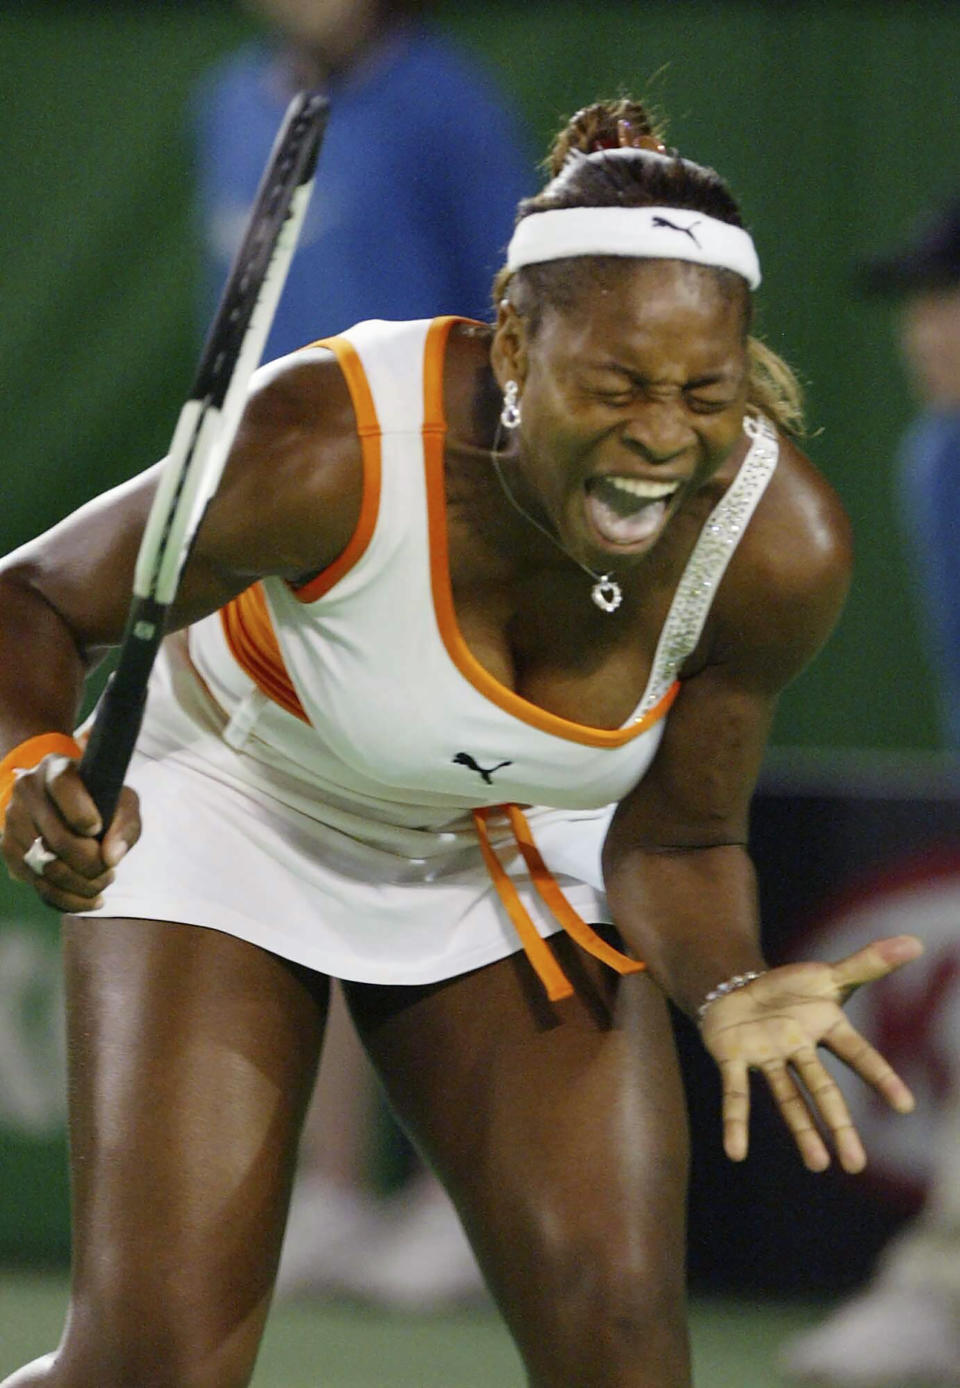 FILE - Serena Williams of the United States screams in her match against her sister, Venus, in the women's singles final at the Australian Open Tennis Tournament in Melbourne, Saturday, Jan. 25, 2003. Saying “the countdown has begun,” 23-time Grand Slam champion Serena Williams announced Tuesday, Aug. 9, 2022, she is ready to step away from tennis so she can turn her focus to having another child and her business interests, presaging the end of a career that transcended sports. (AP Photo/Rick Stevens, File)